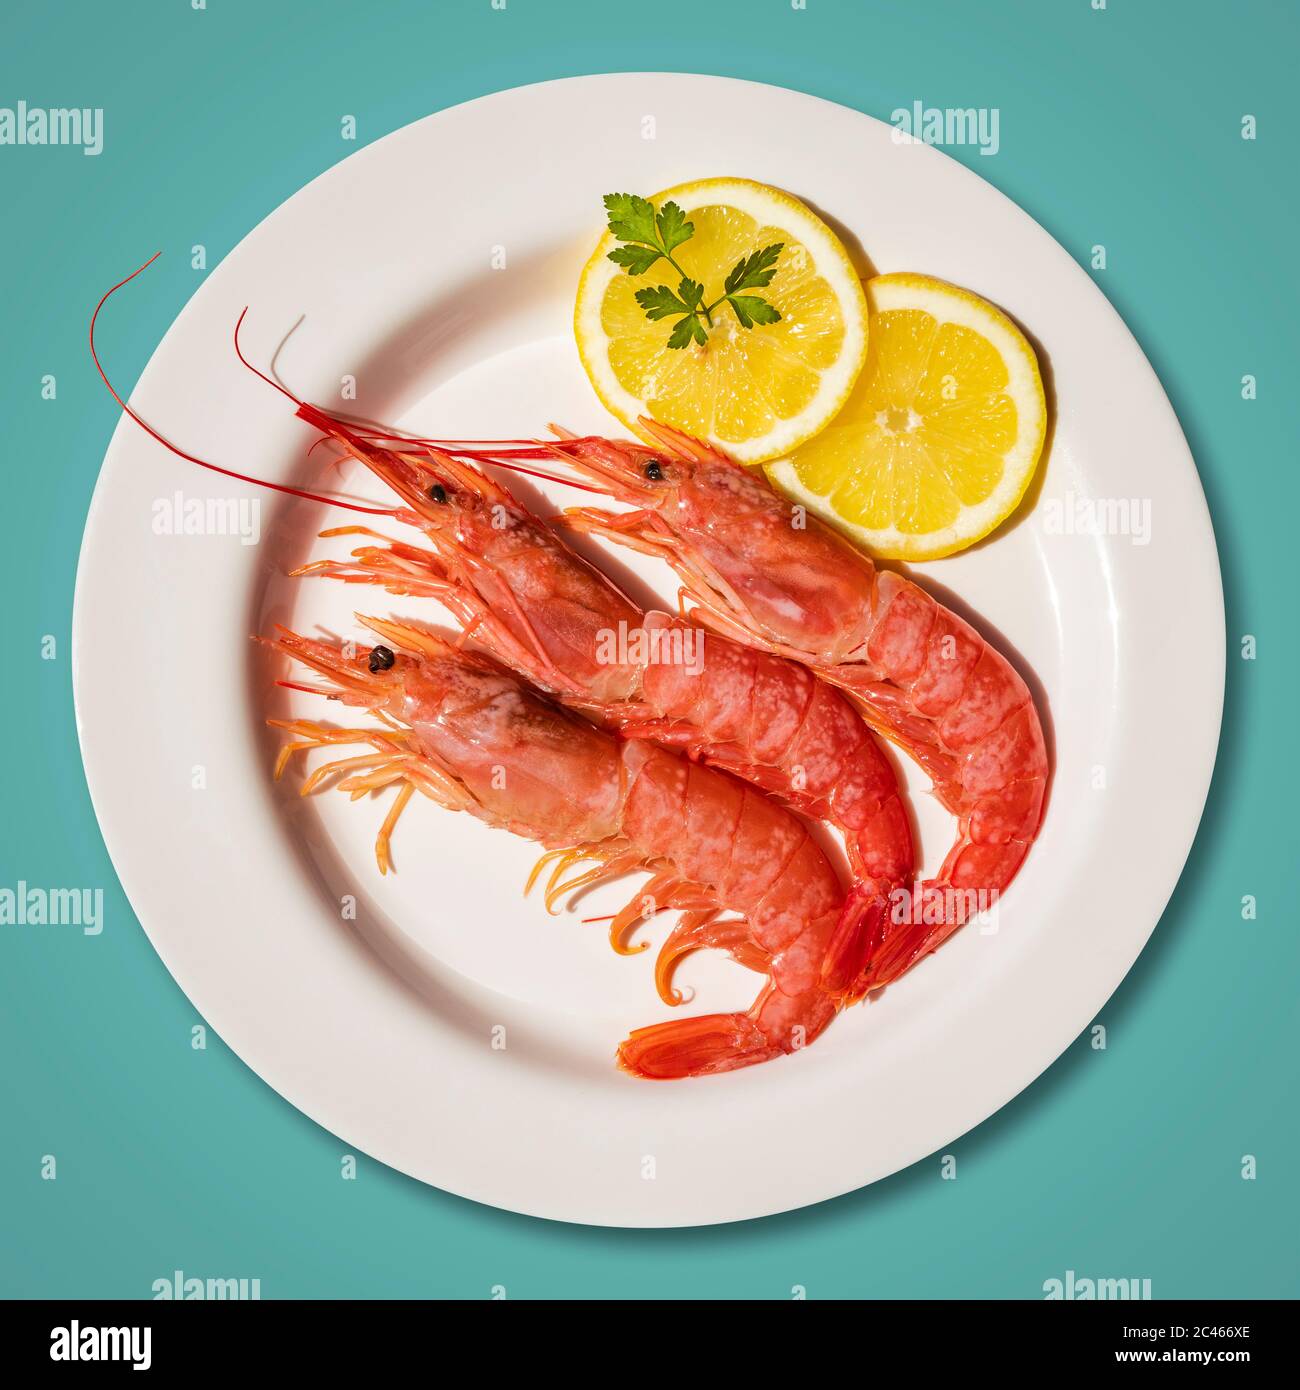 Macro close-up of a plate with three large red prawns, raw, fresh. Dish garnished with two round slices of lemon and parsley leaf. Isolated on blue ba Stock Photo